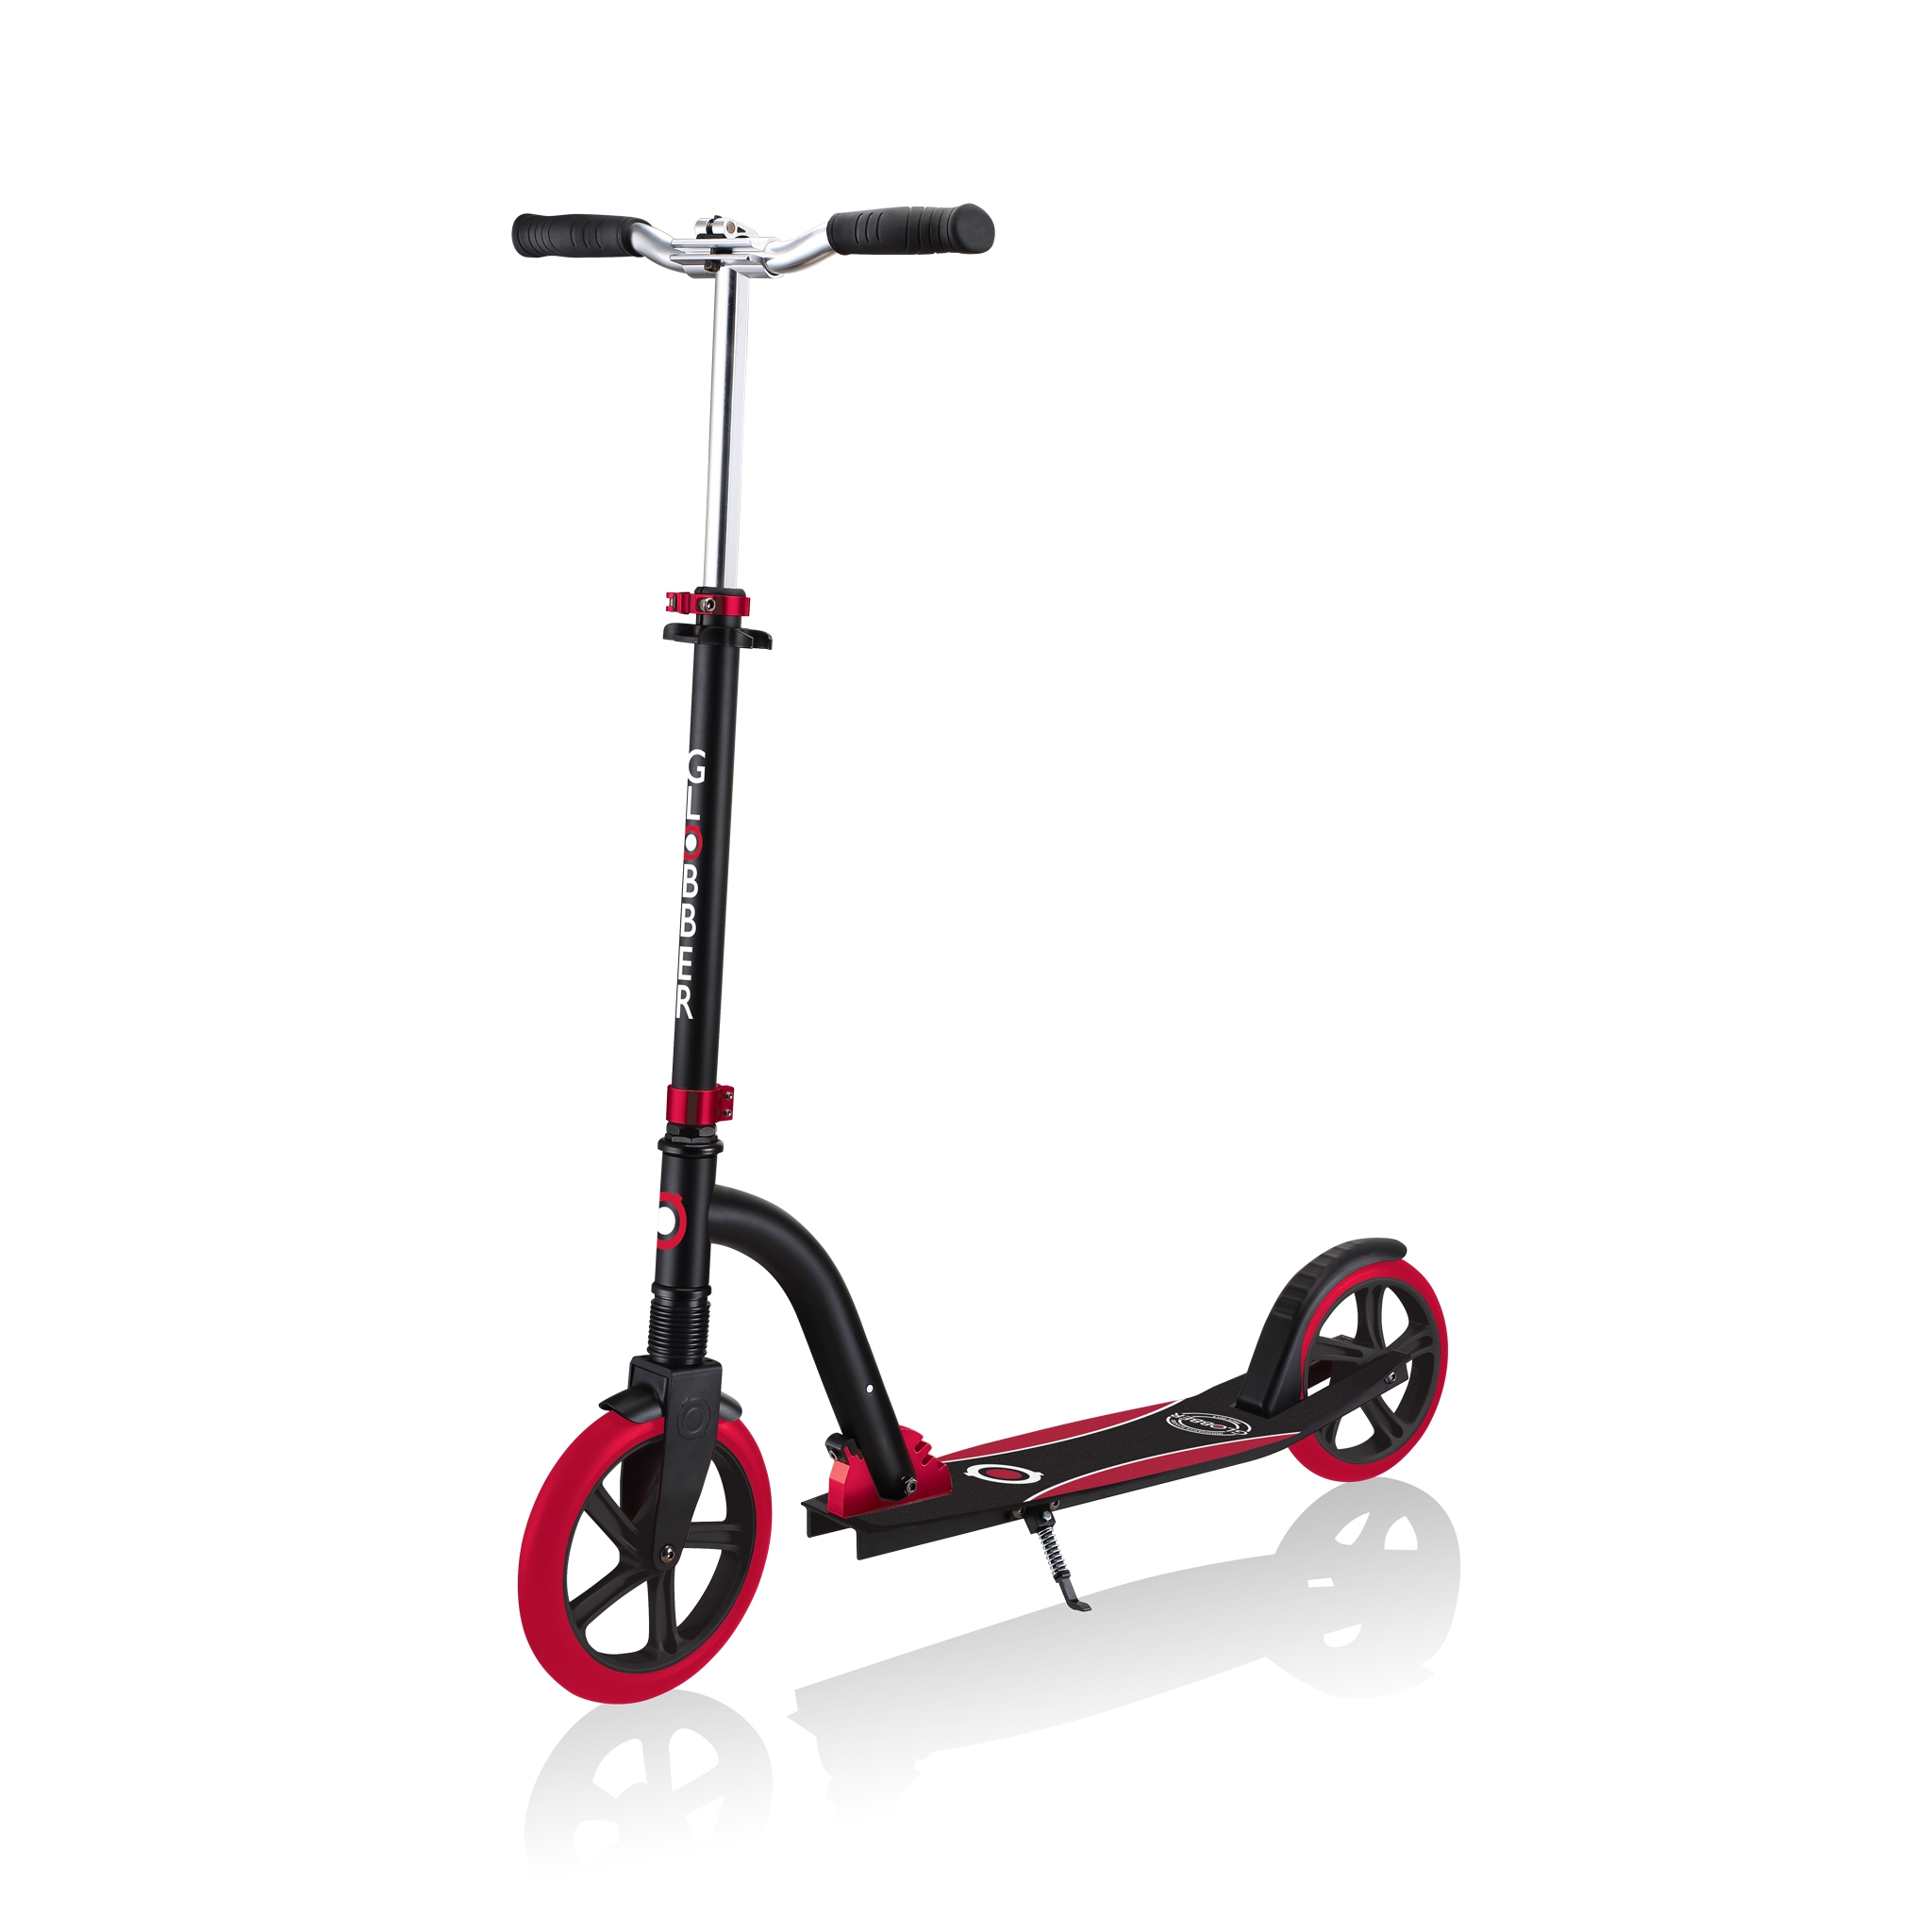 NL-230-205-DUO-best-big-wheel-scooters-for-kids-and-teens 8